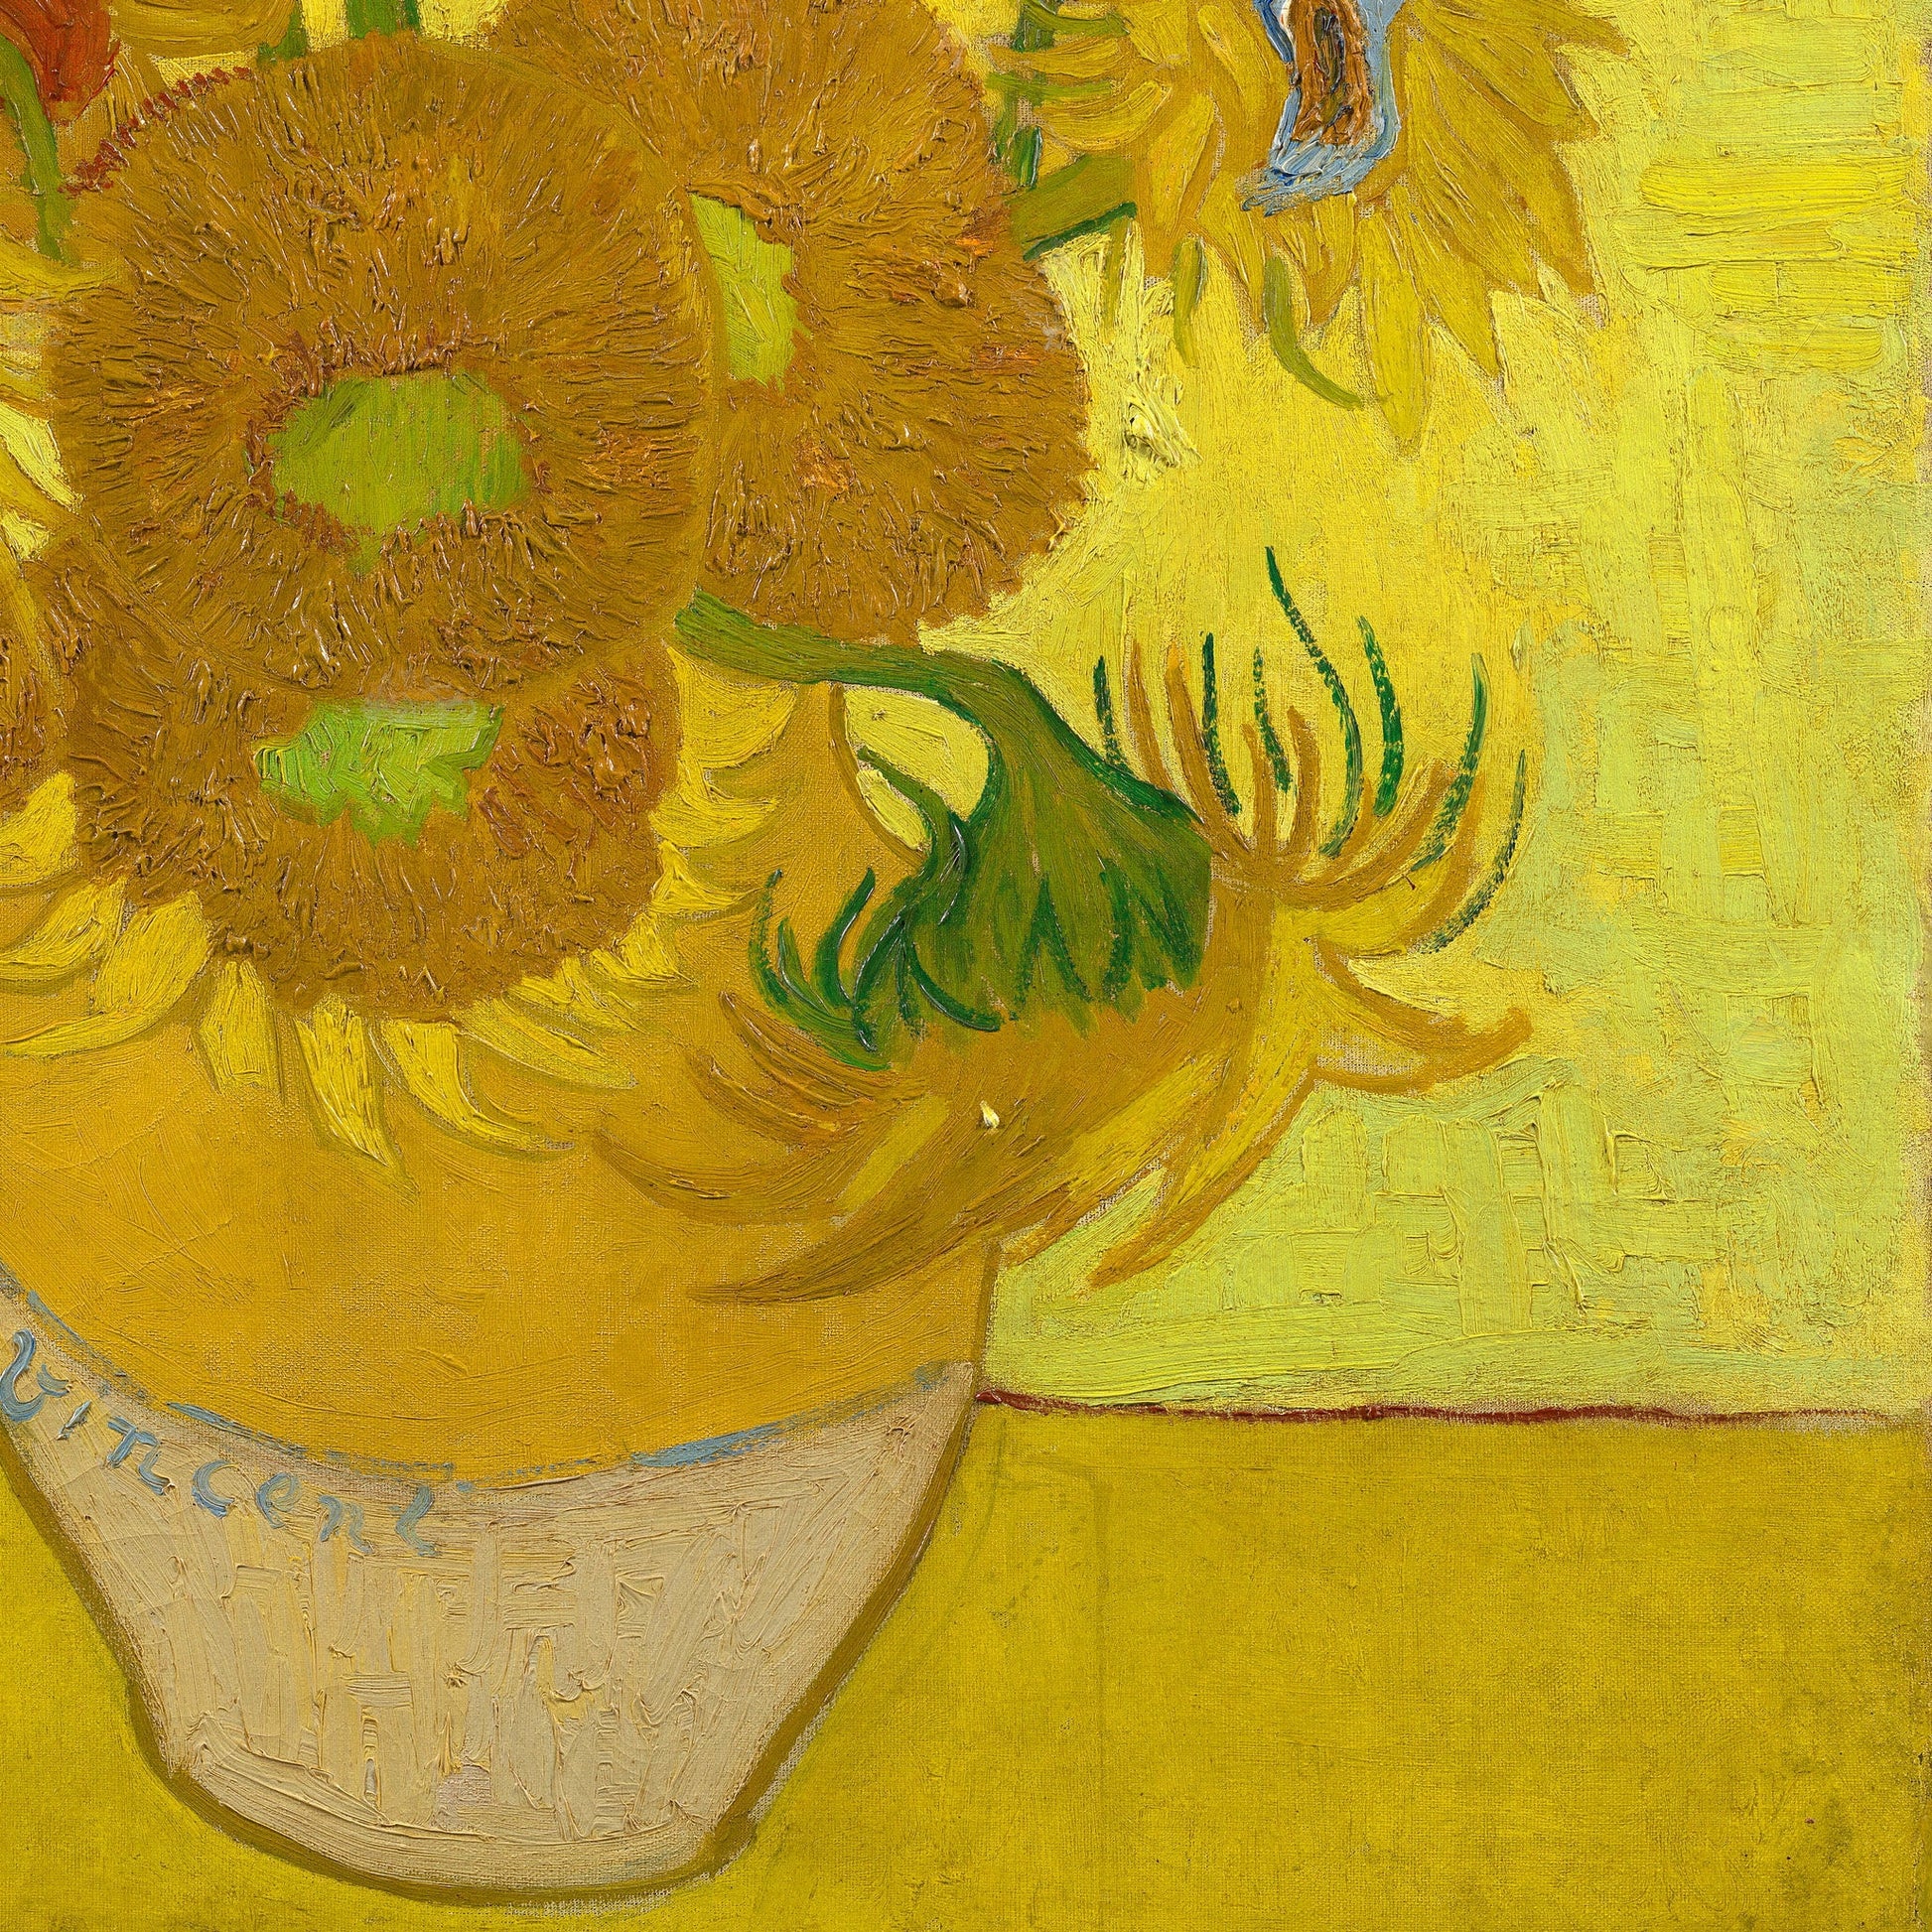 Sunflowers by Vincent Van Gogh, 3d Printed with texture and brush strokes looks like original oil-painting, code:076